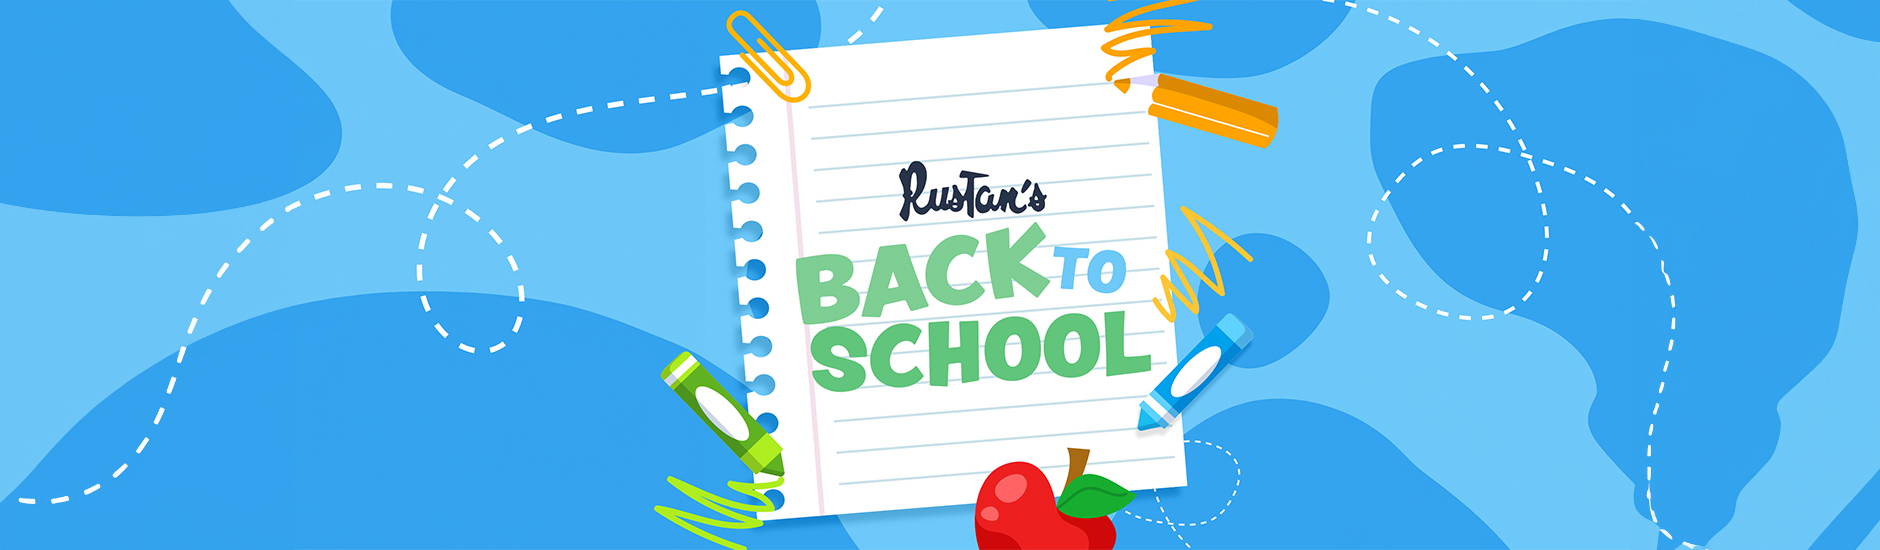 It's back to school with Rustan's